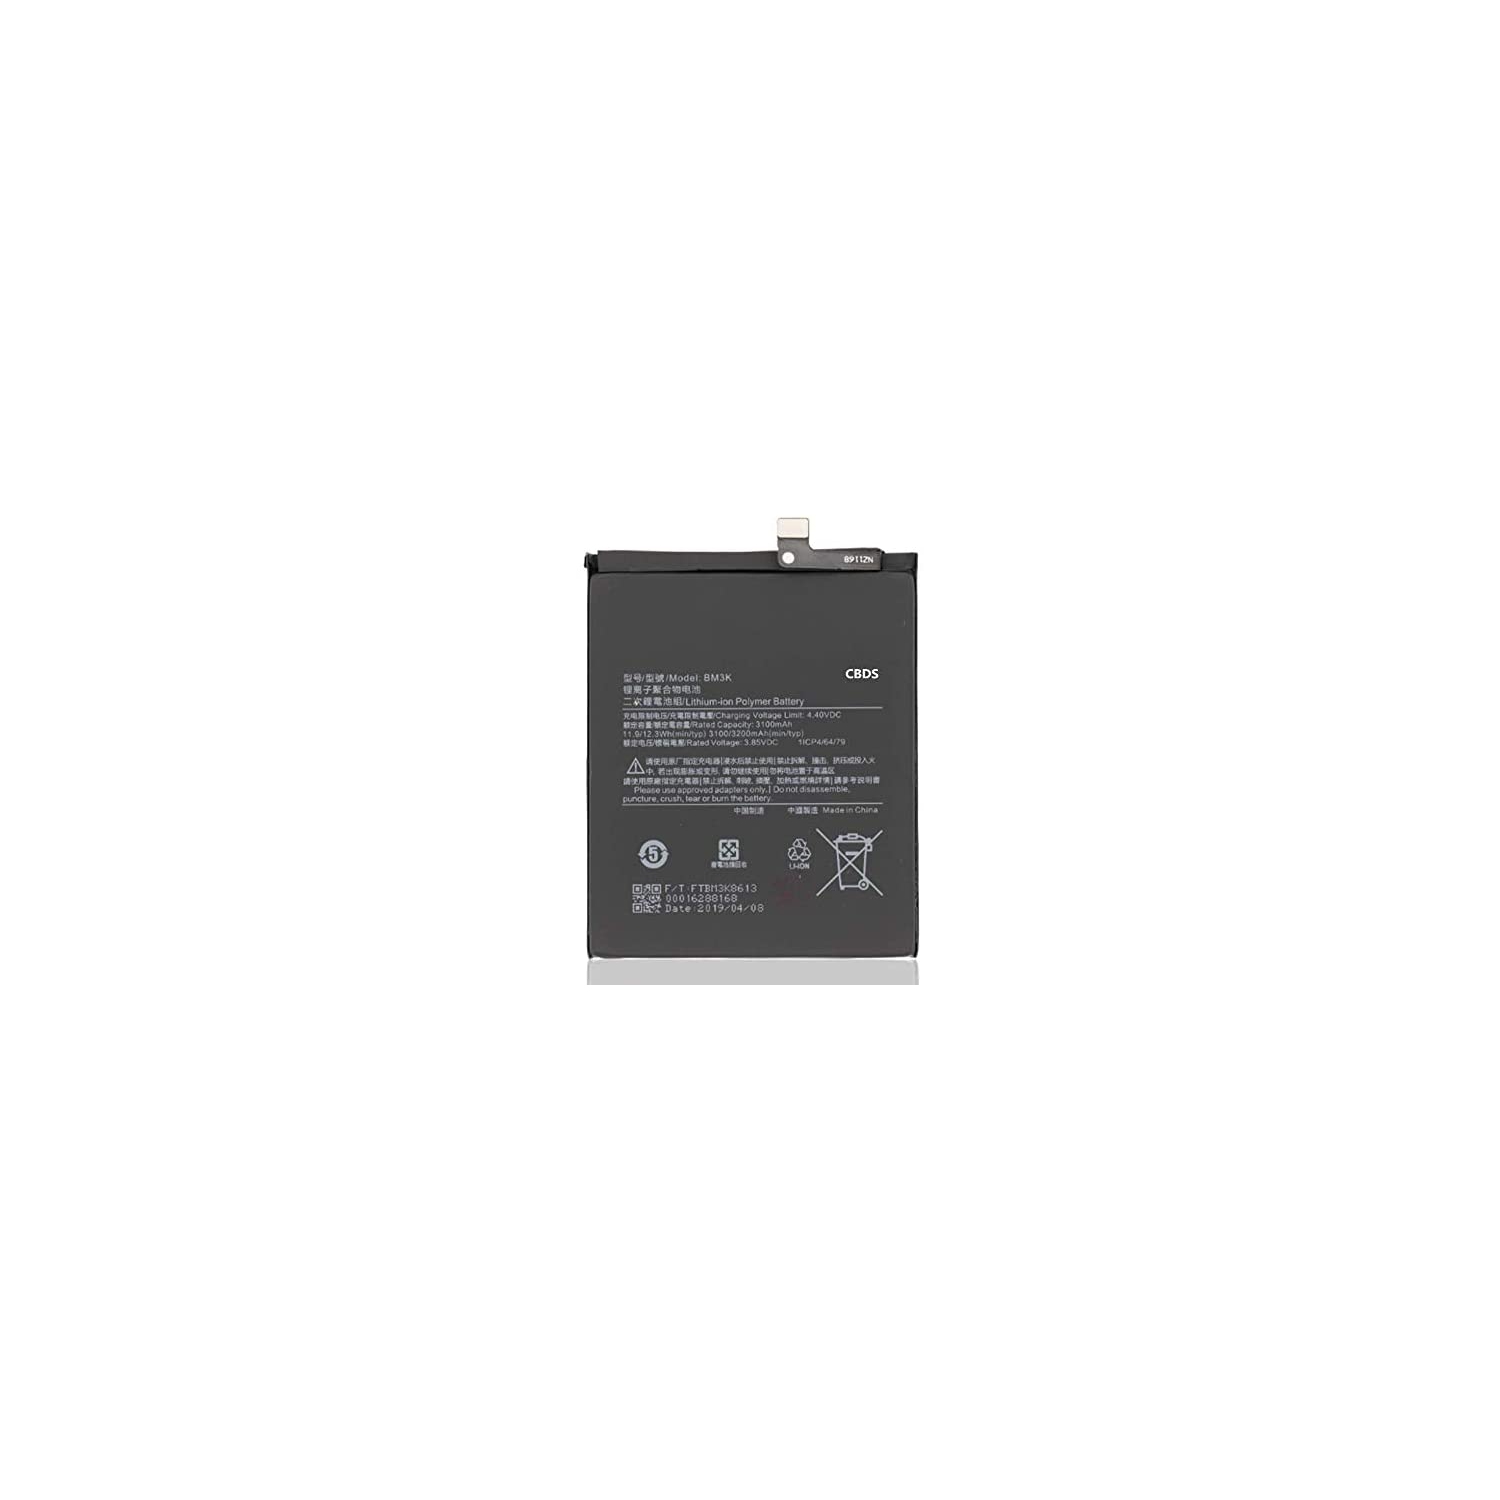 (CBDS) 3100mAh, 11.9 Wh Replacement Battery - Compatible with XIAOMI MI Mix 3 BM3K in Non-Retail Packaging.